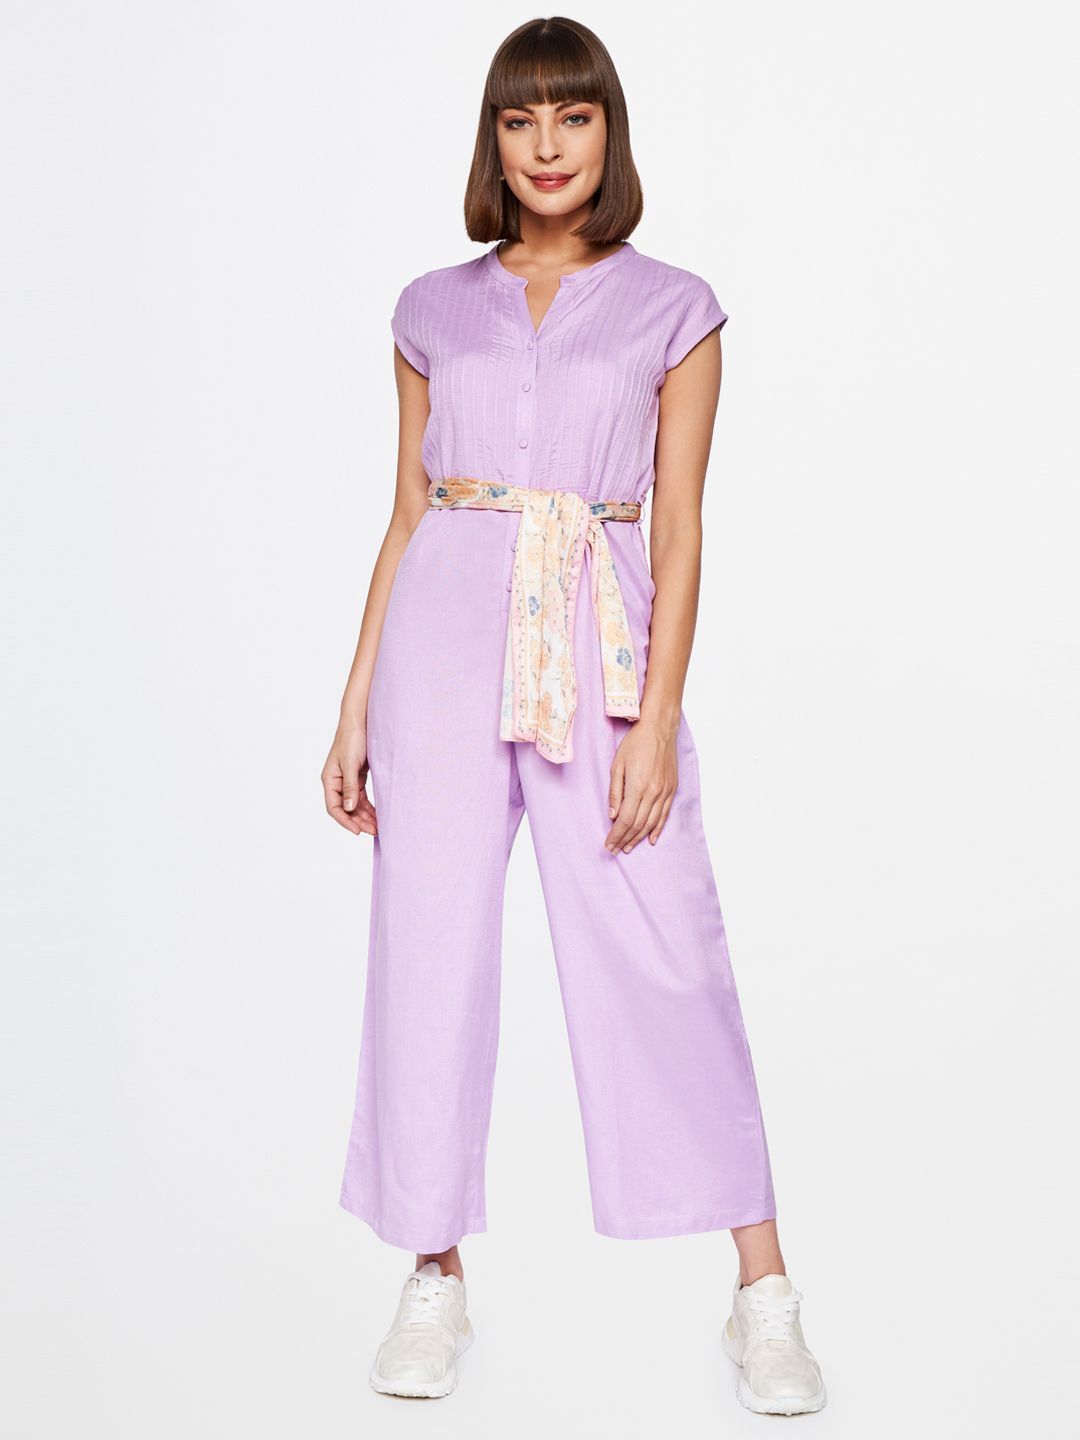 AND Purple Basic Jumpsuit Price in India